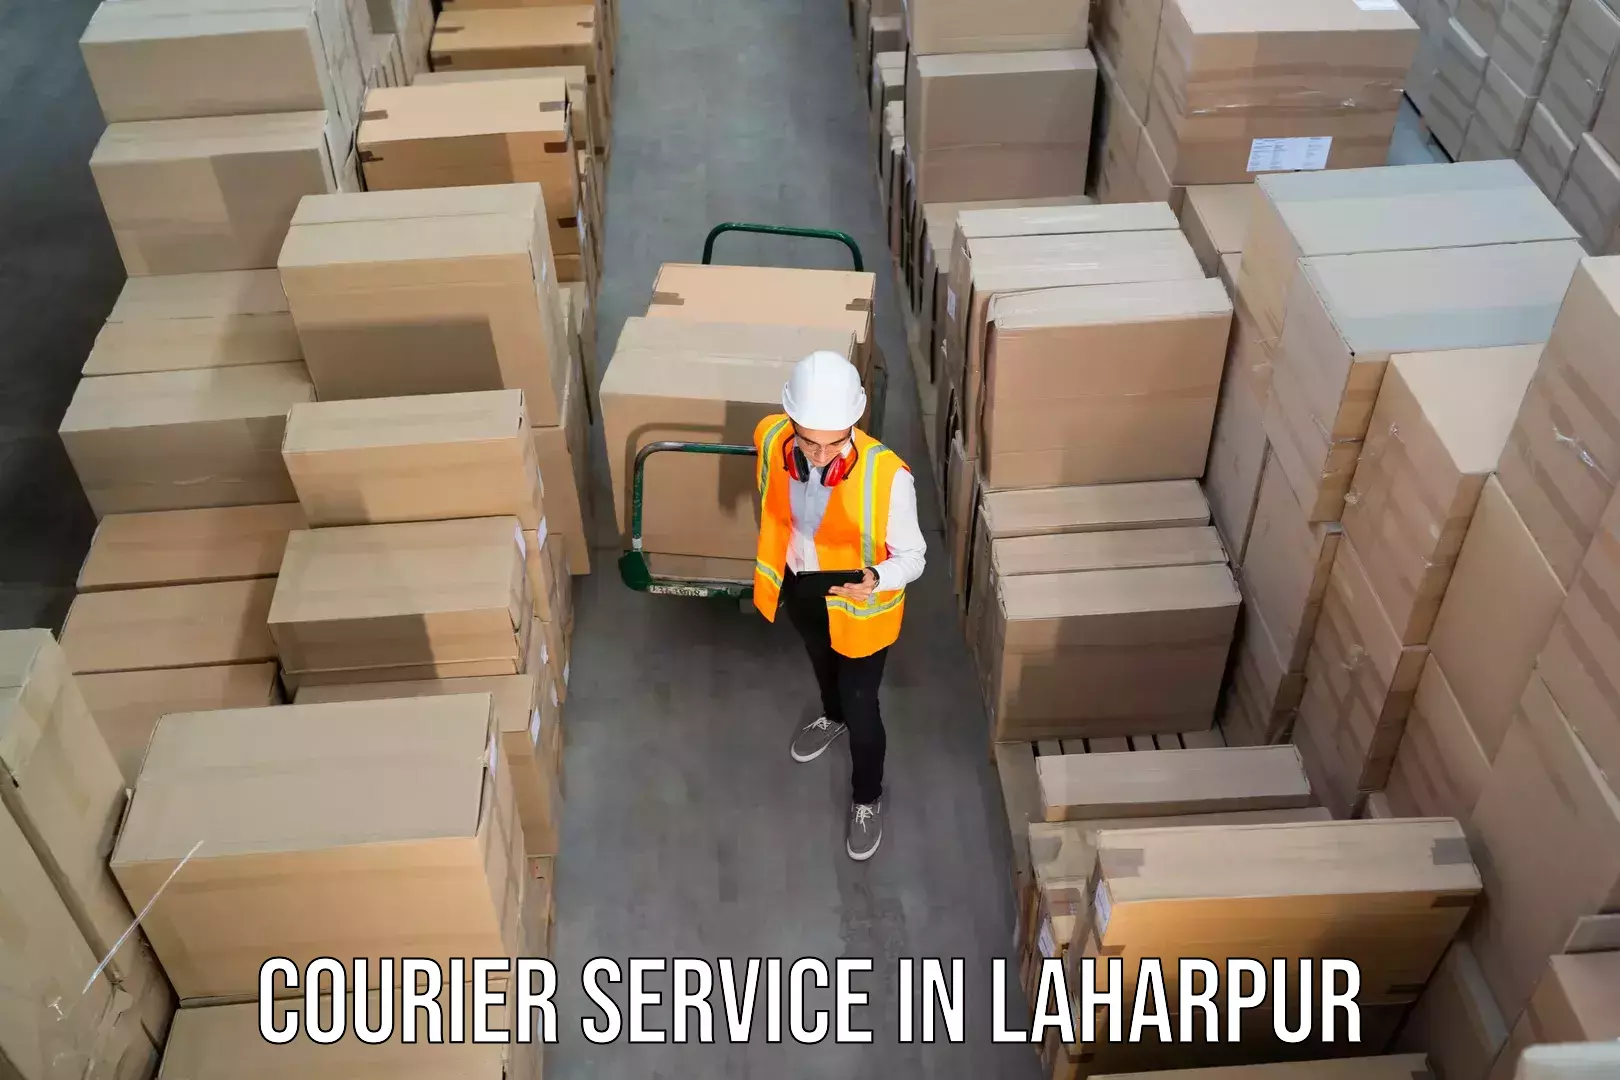 Scheduled delivery in Laharpur